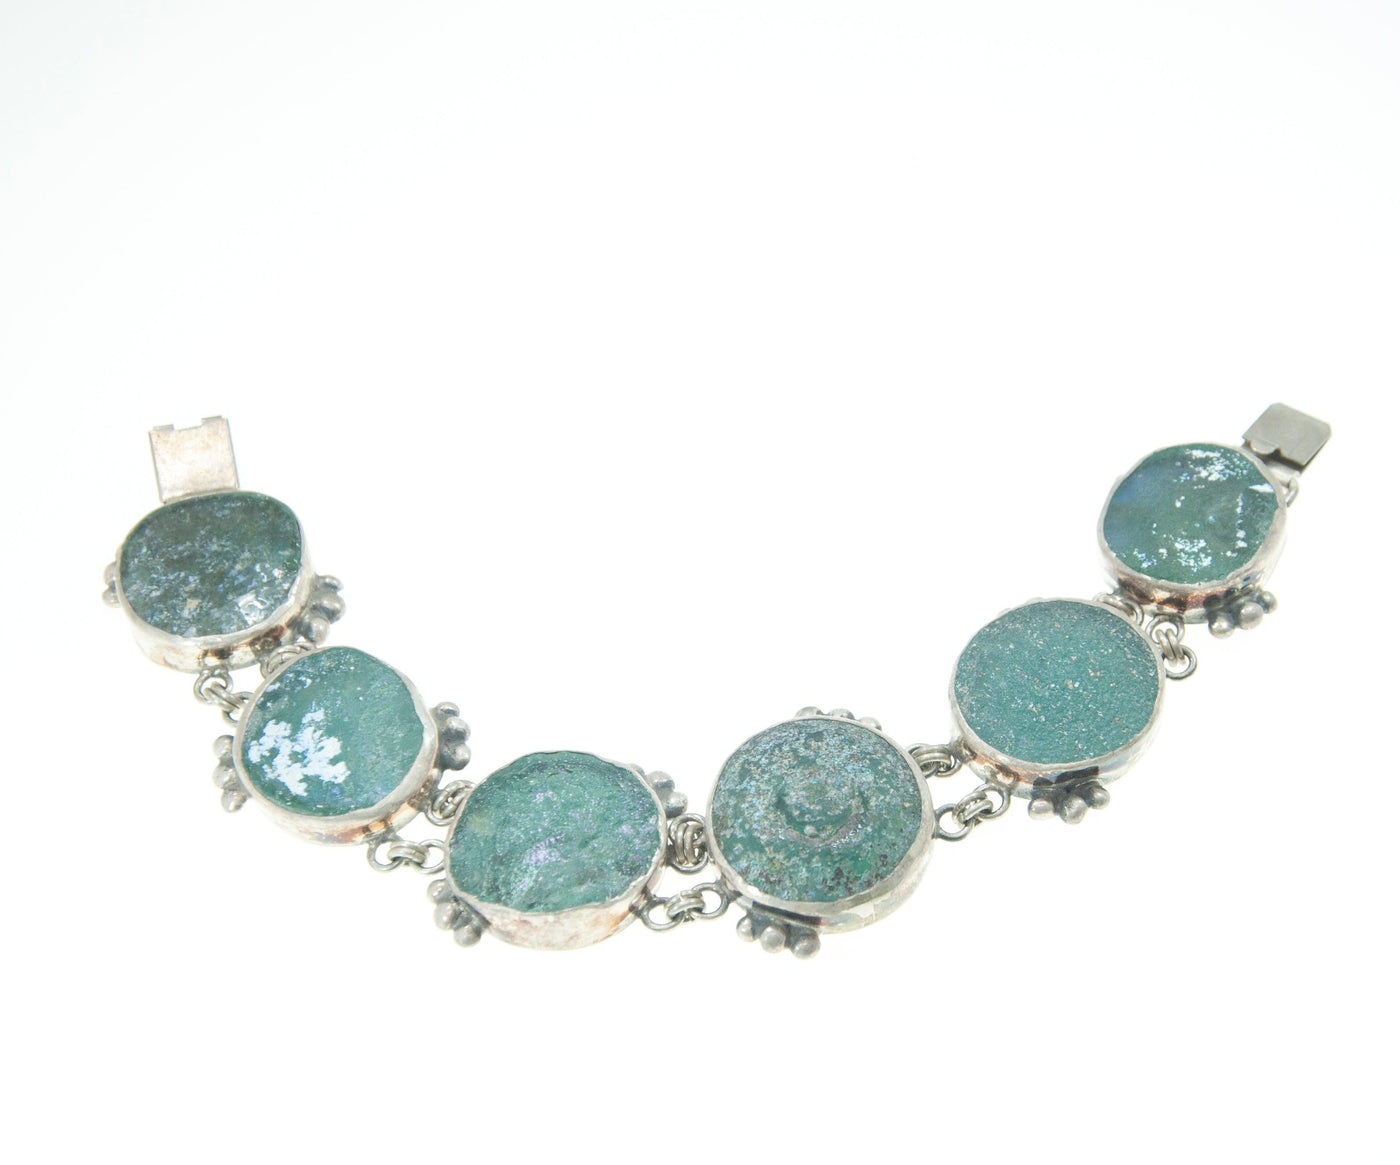 Roman Glass Bracelet Authentic & Luxurious With Certificate from Holyland - Spring Nahal